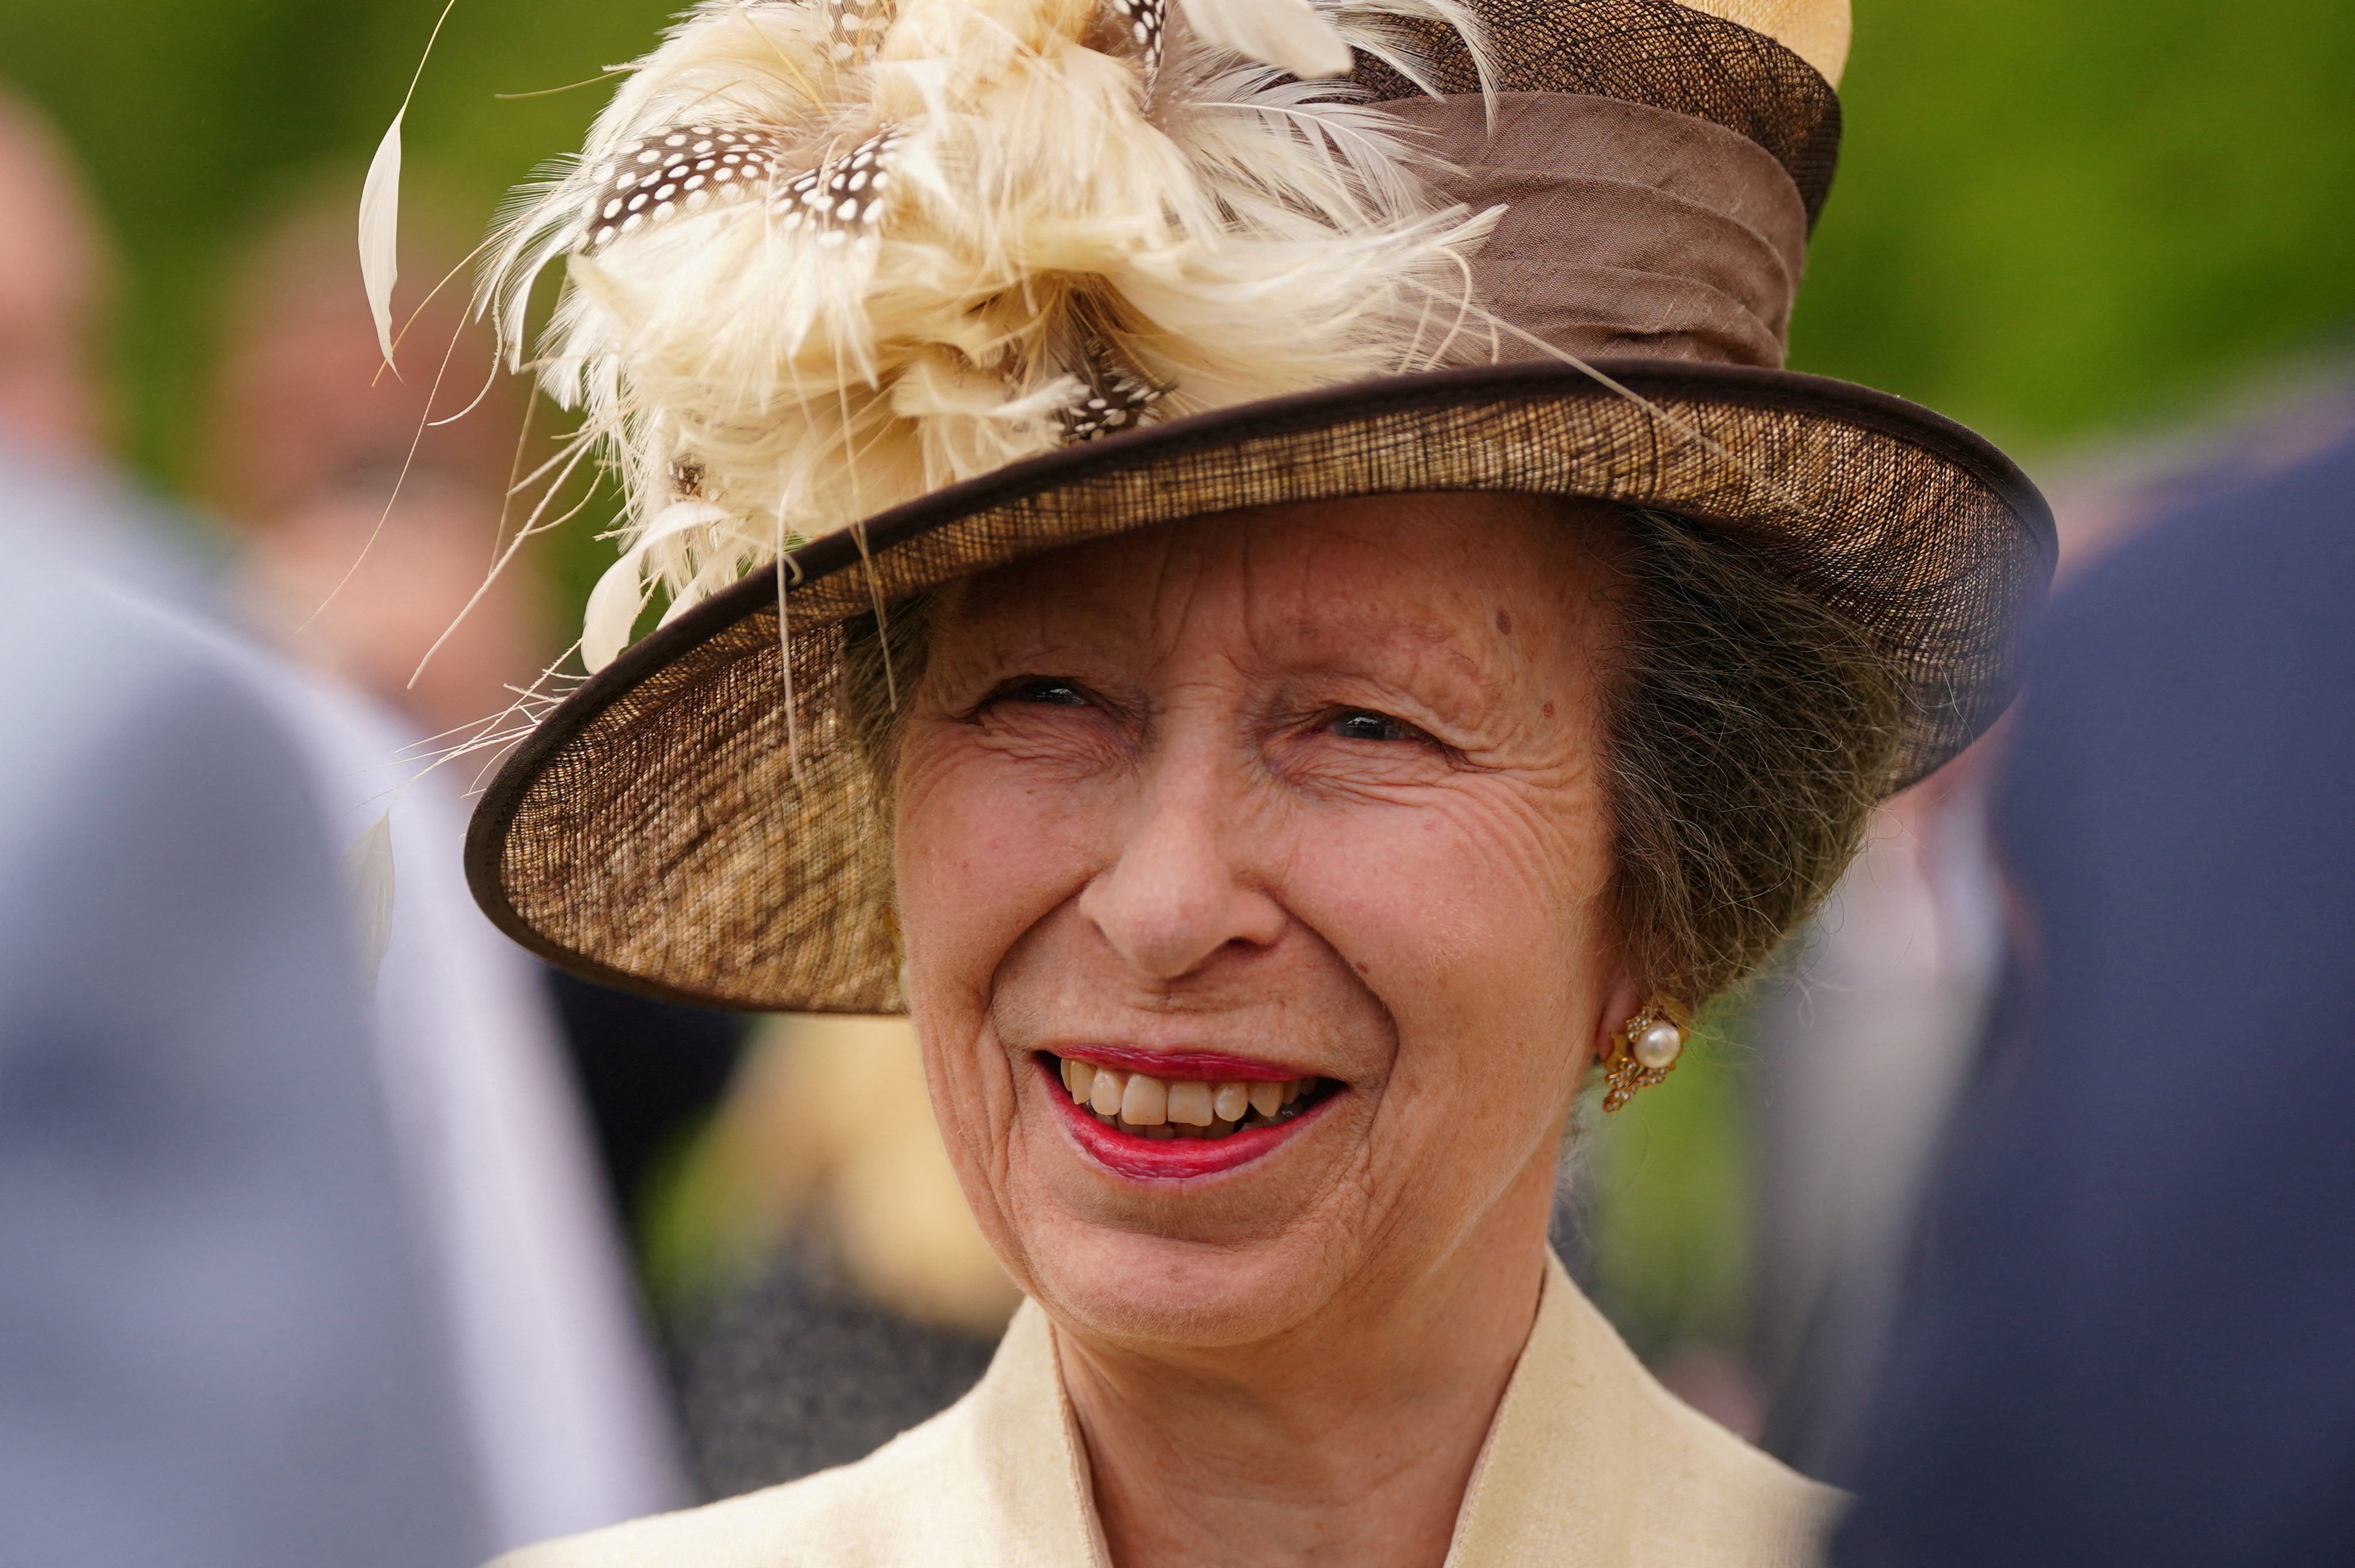 Princess Anne, sister of King Charles III, was in hospital on Monday with “minor injuries and concussion” after apparently being injured by a horse. Photo: Reuters/Pool